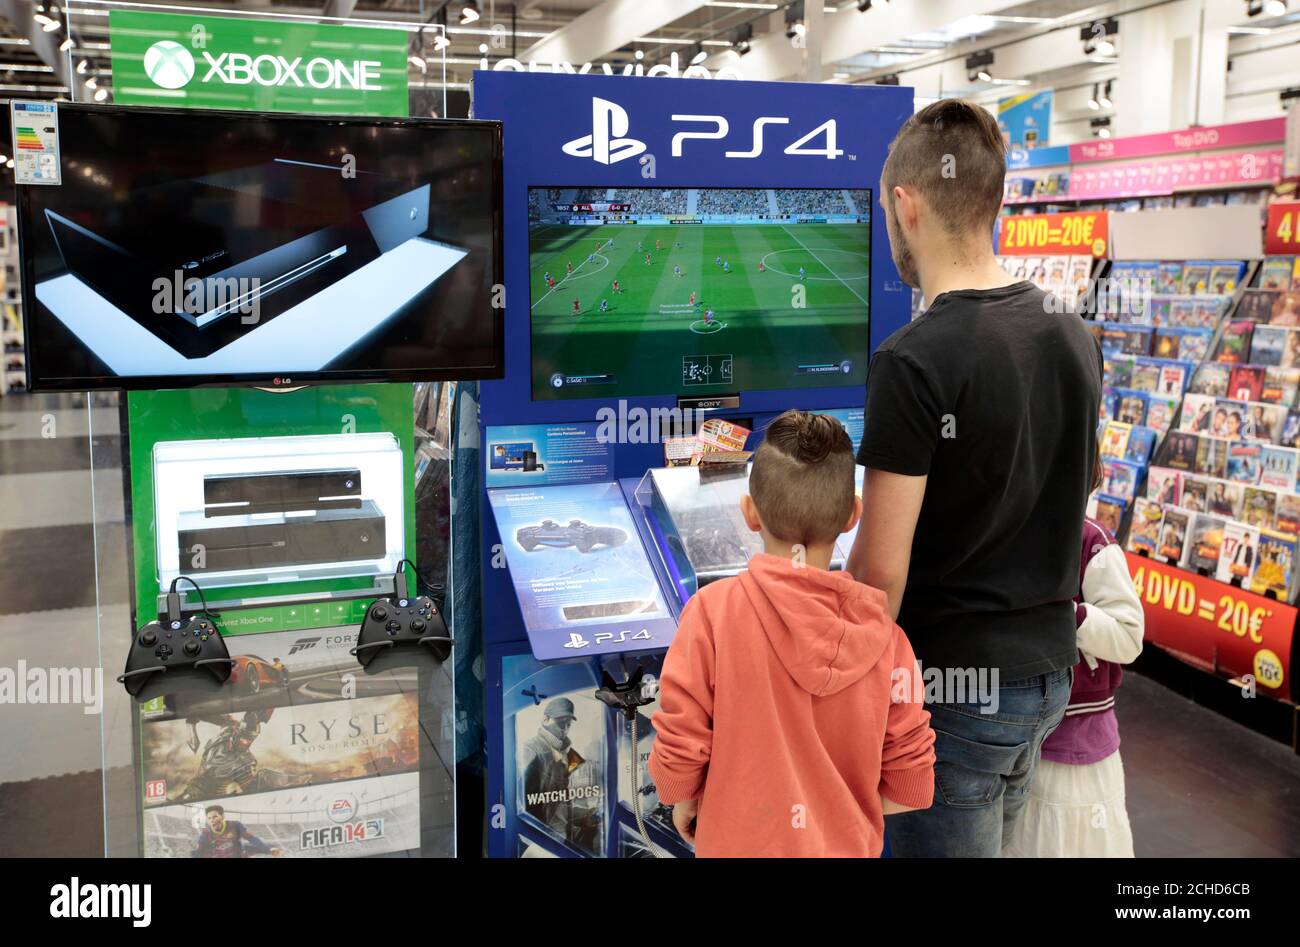 Customers look at games on PlayStation 4 (PS4) at a Carrefour hypermarket  in Nice, France, April 6, 2016. REUTERS/Eric Gaillard Stock Photo - Alamy